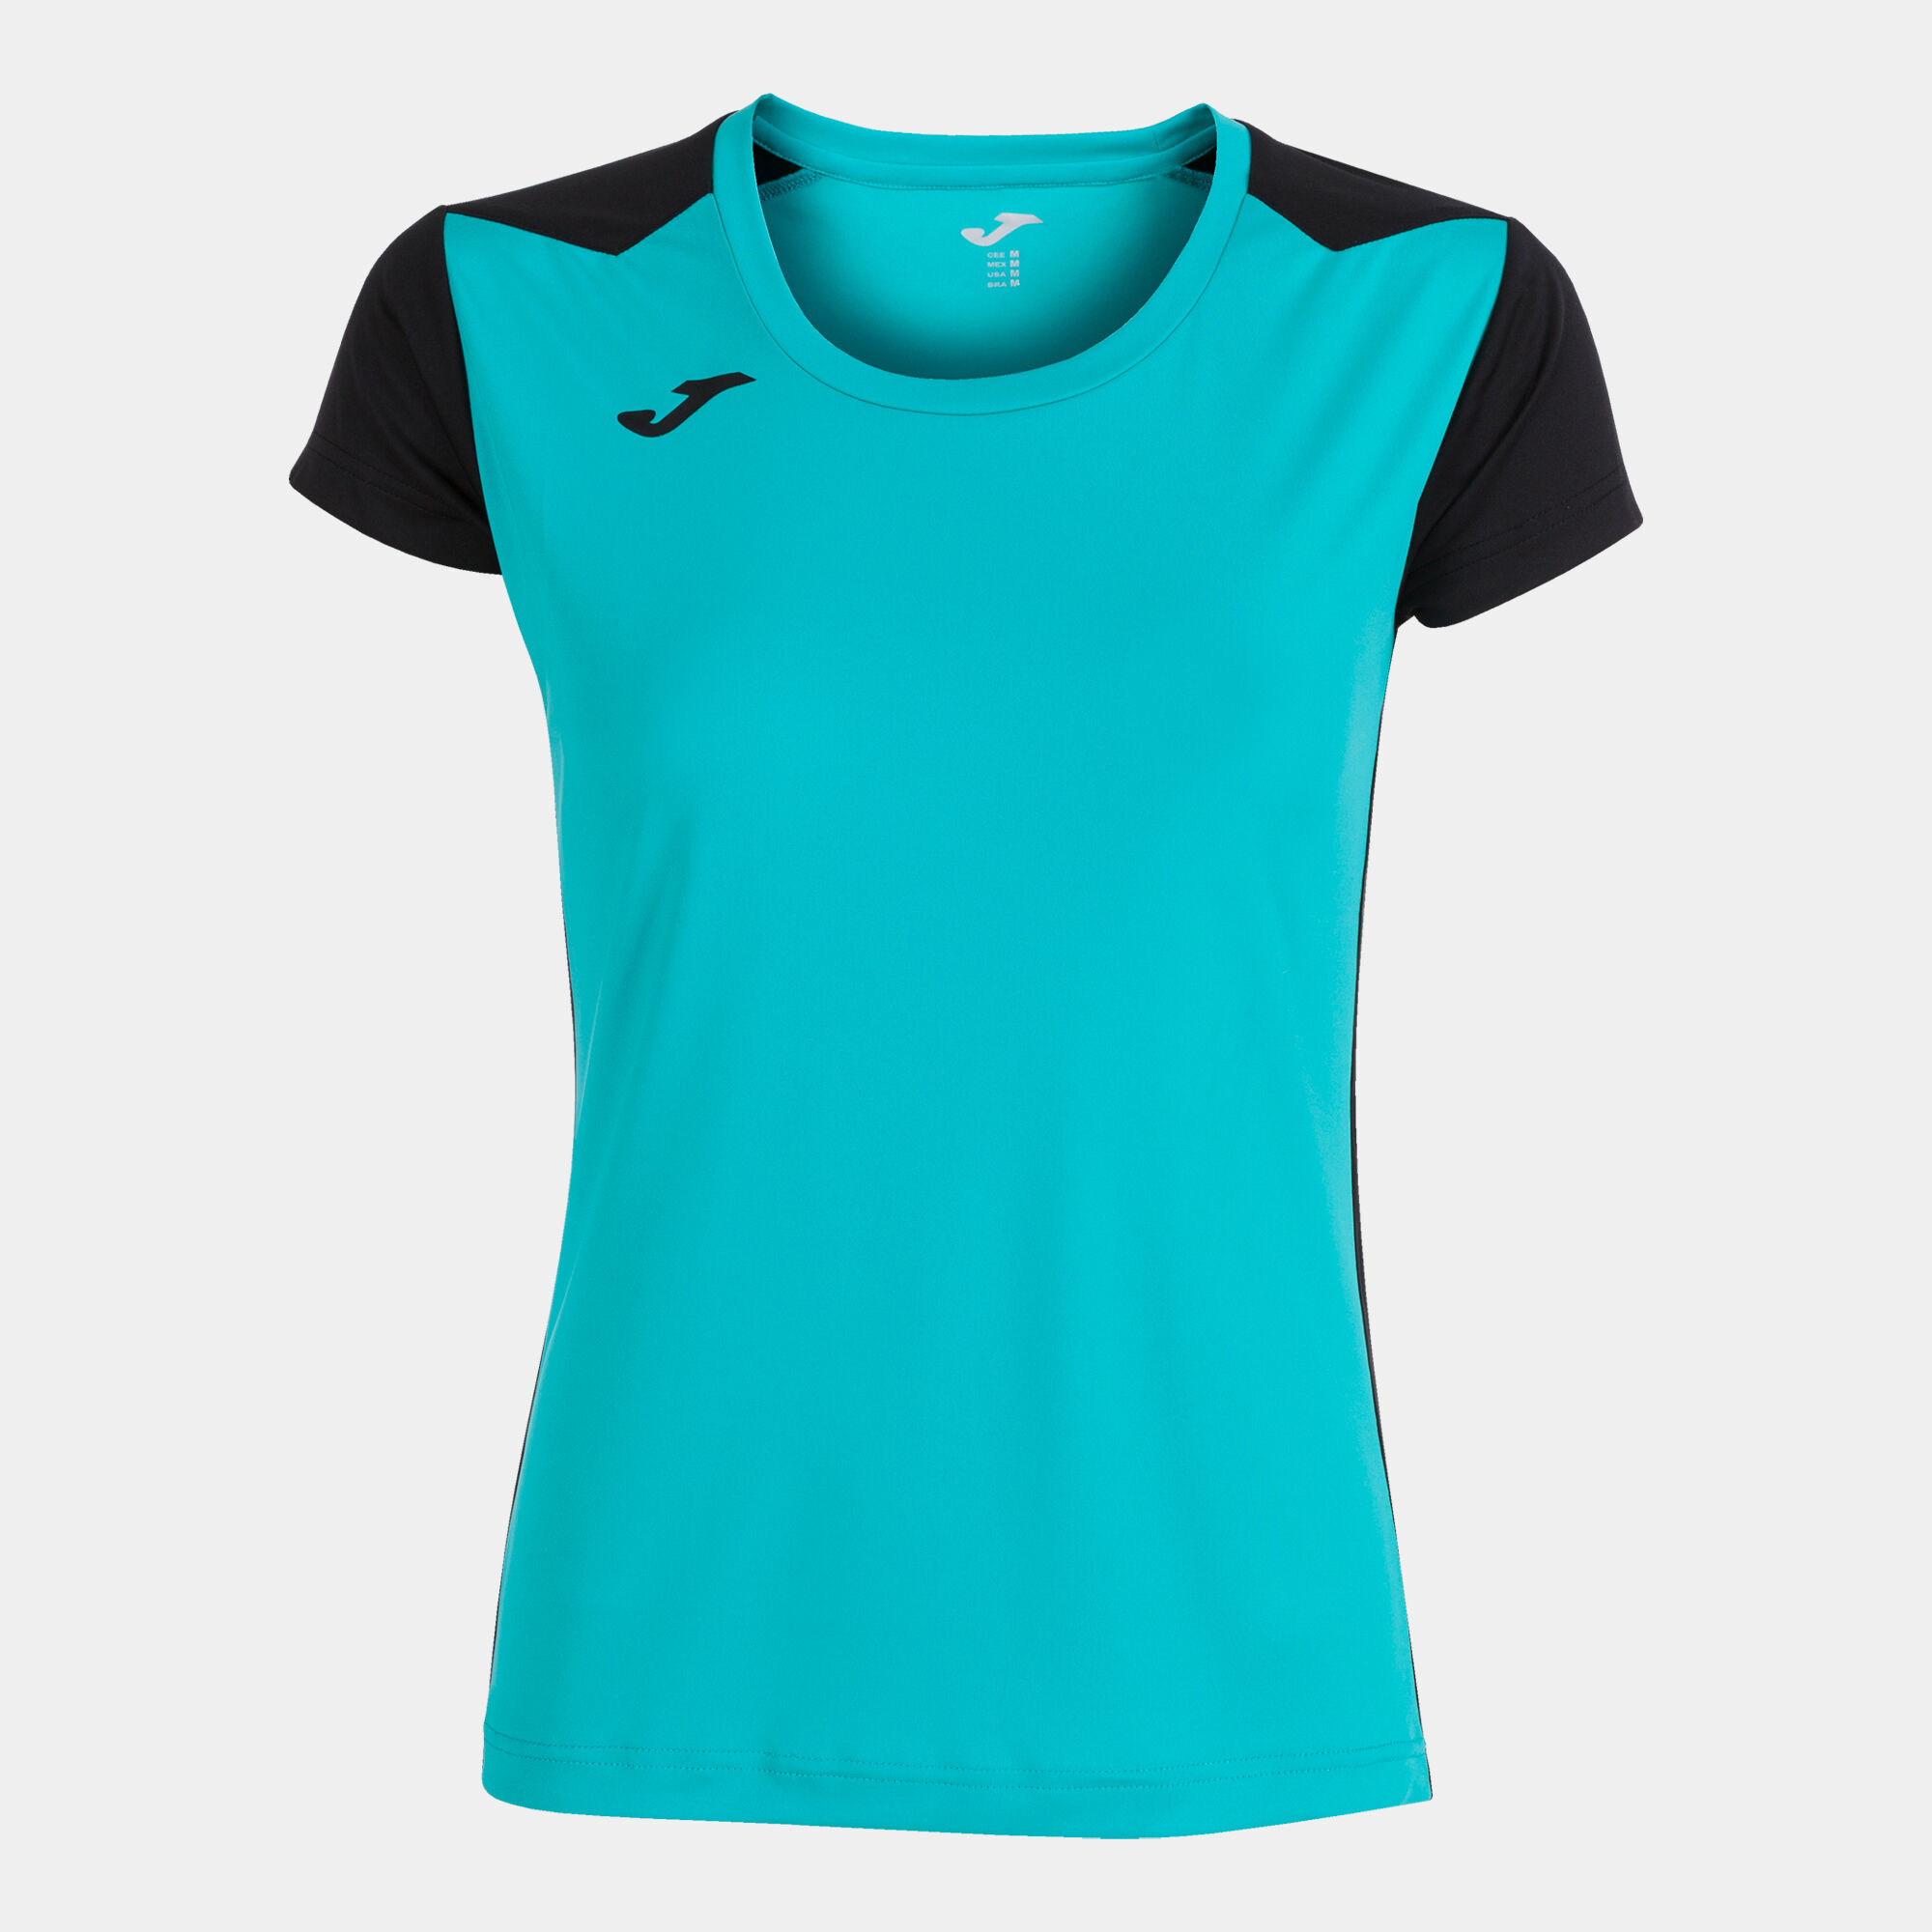 MAILLOT MANCHES COURTES FEMME RECORD II TURQUOISE NOIR